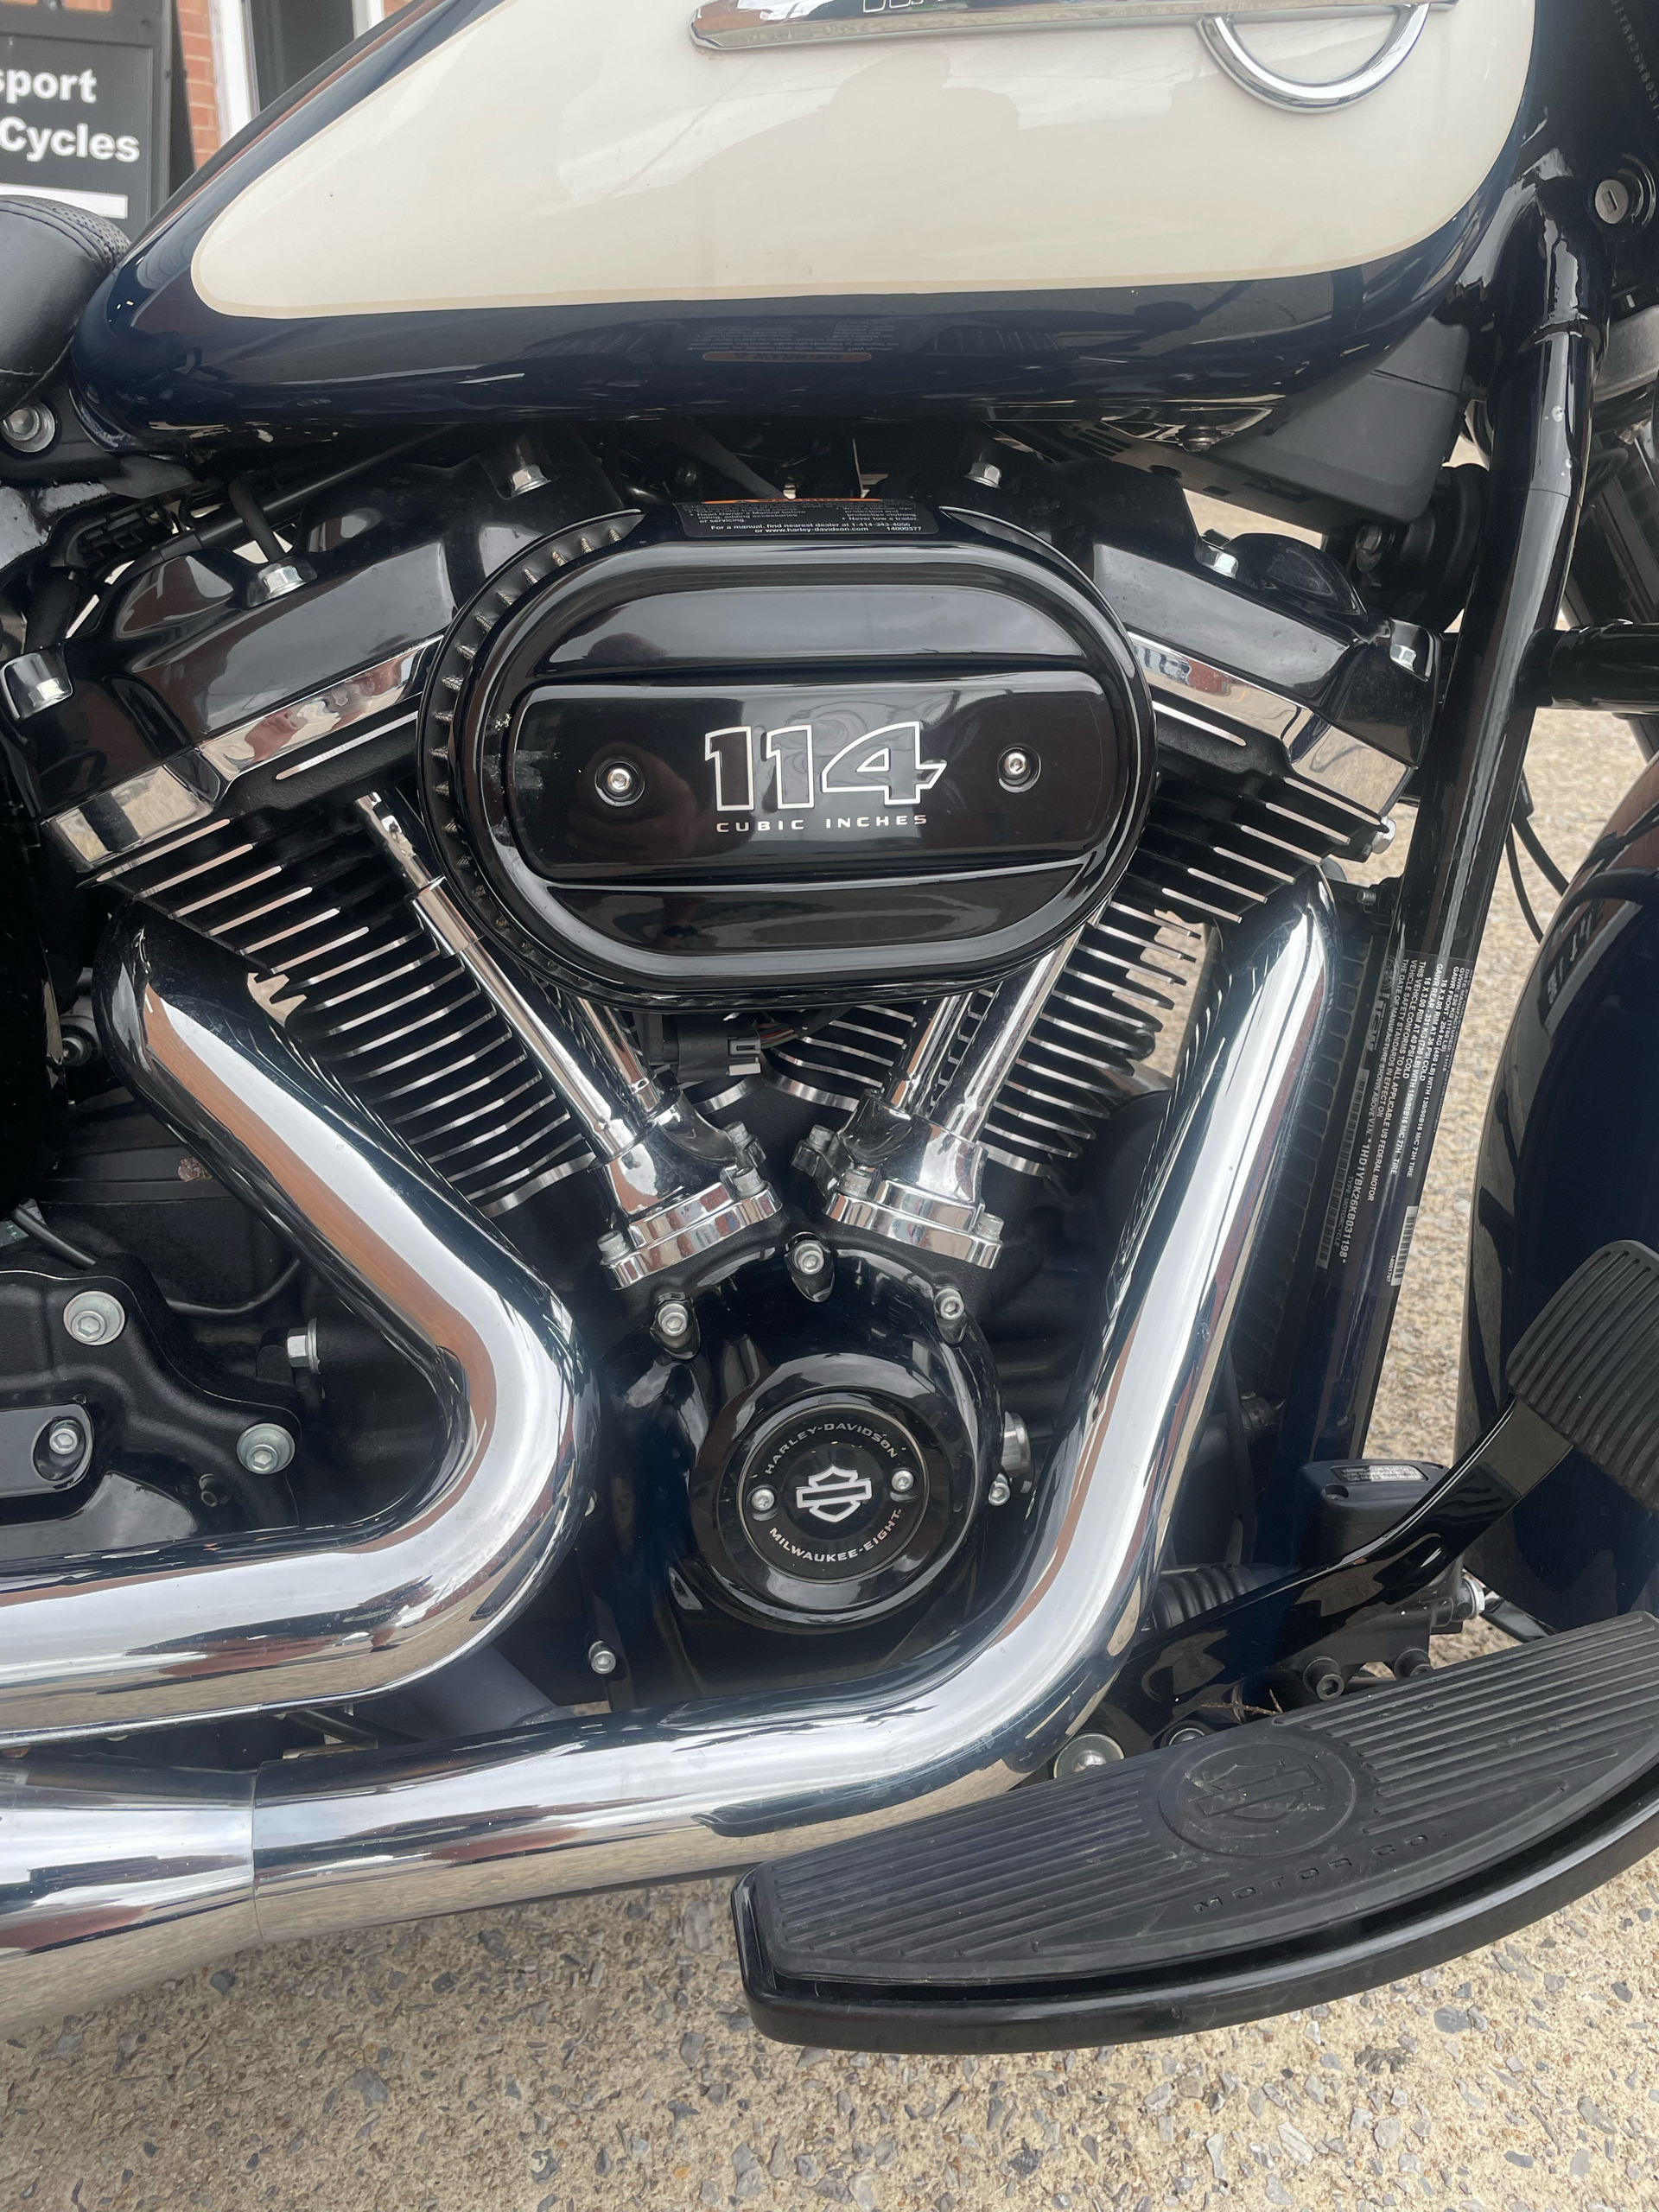 2019 Harley-Davidson Heritage Classic 114 in Kingsport, Tennessee - Photo 4